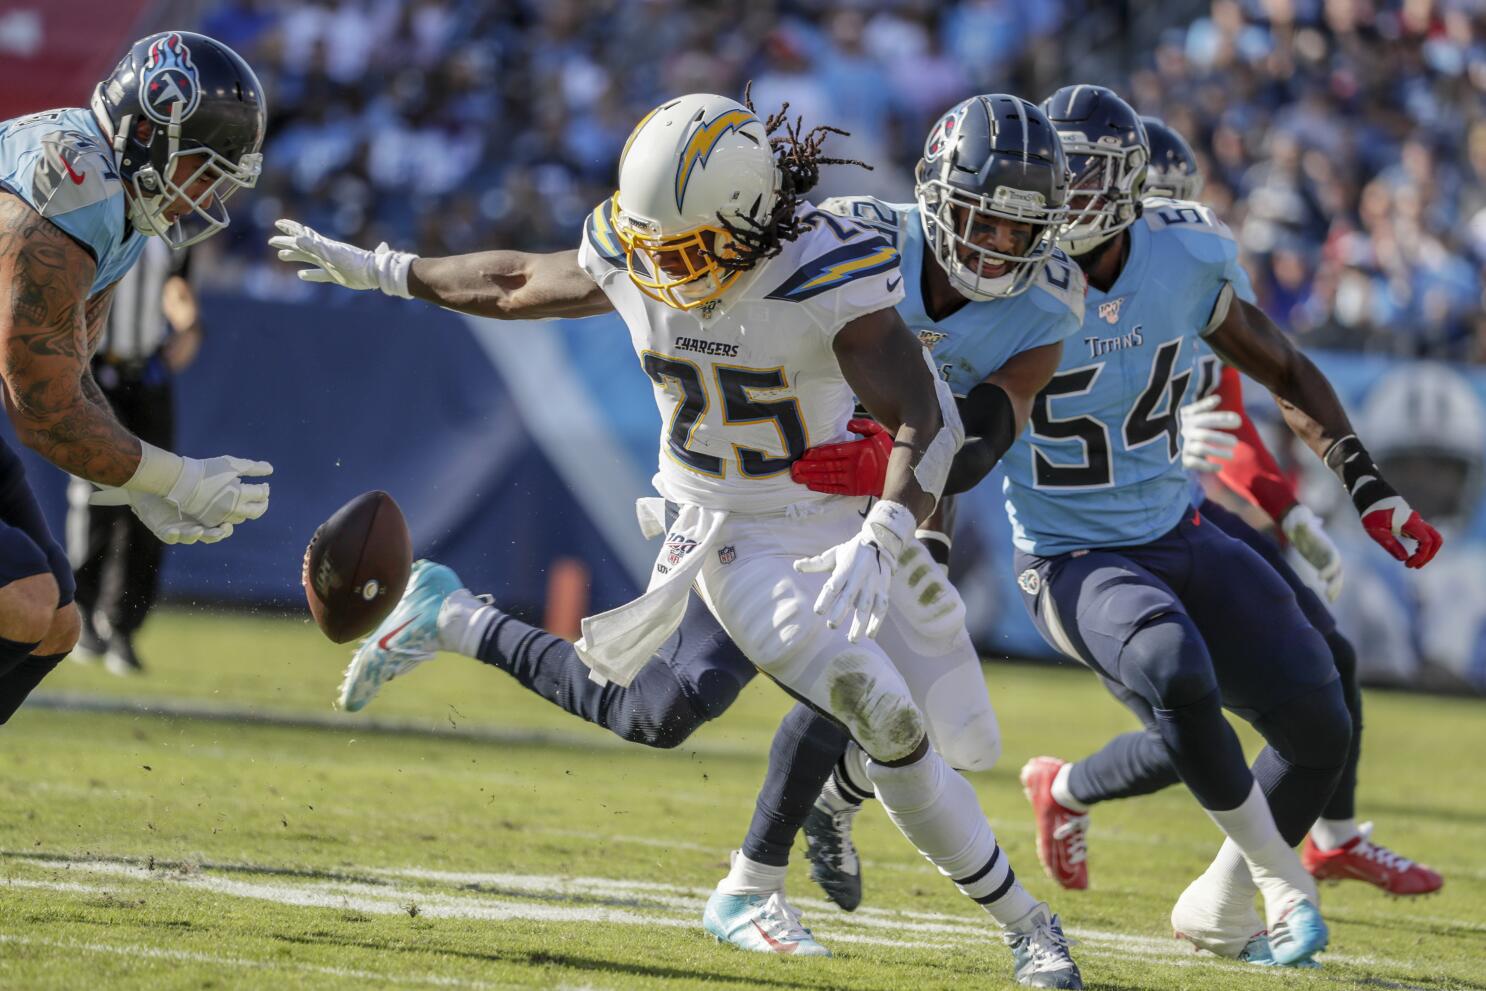 Chargers beat Titans with last-minute field goal – Orange County Register